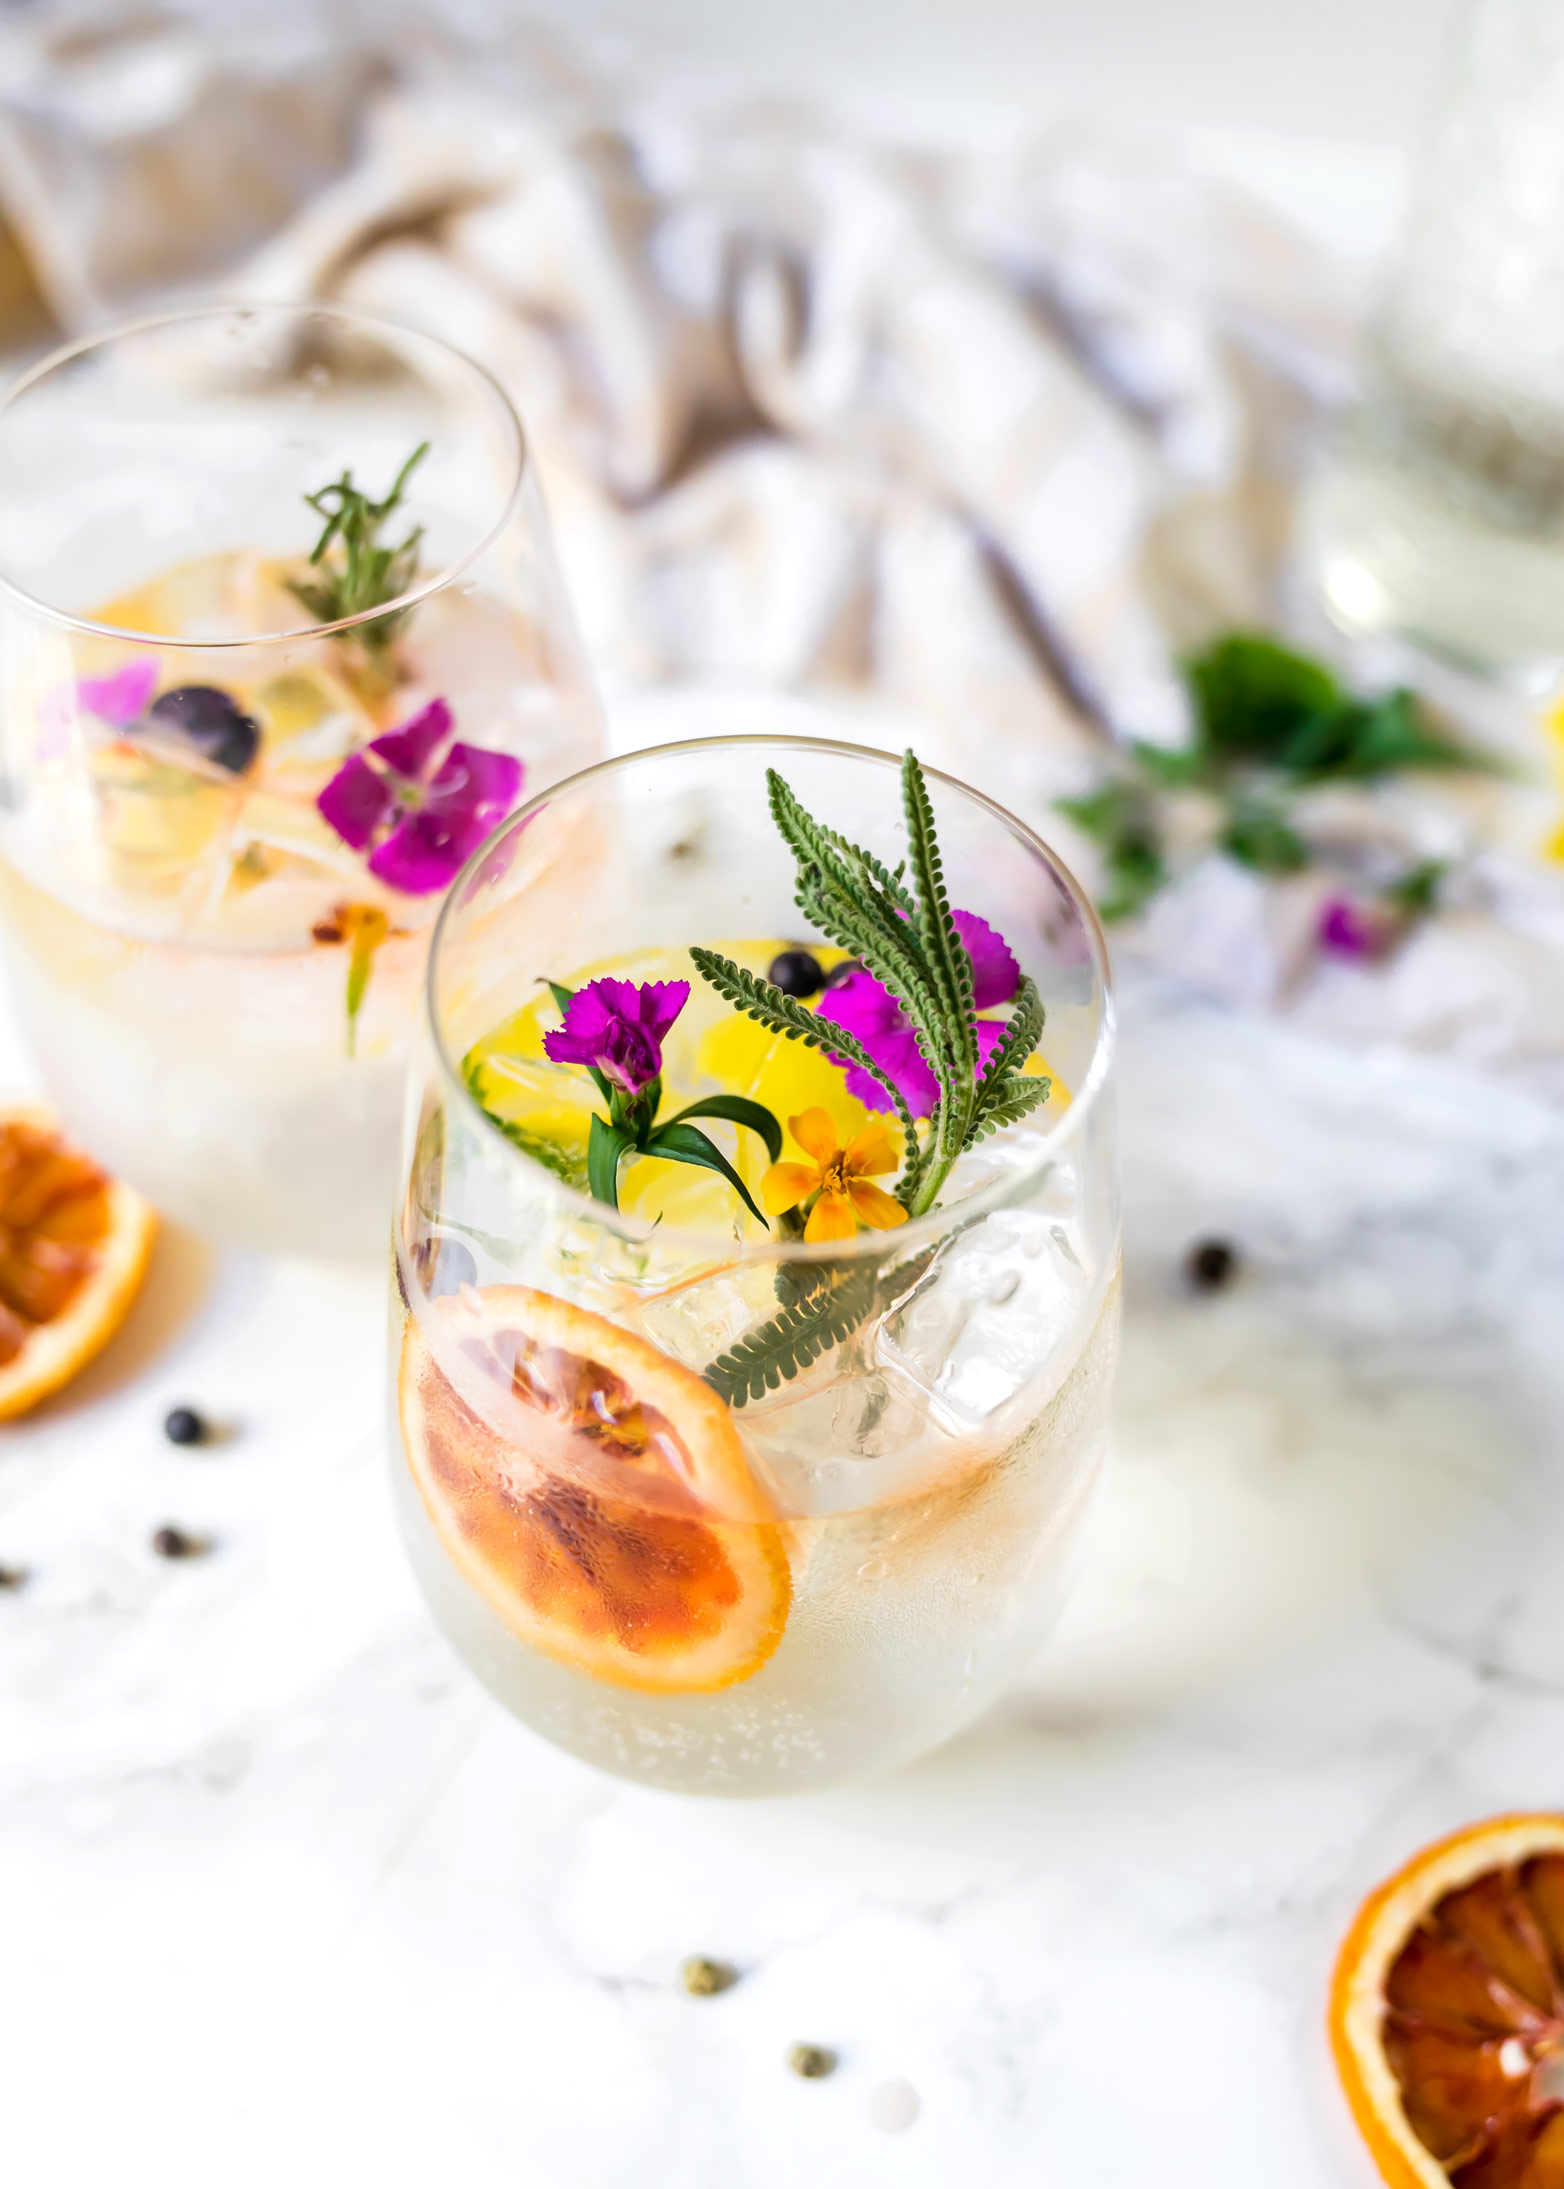 5 Edible Flower Garnish Ideas To Try – NIO Cocktails (UK)